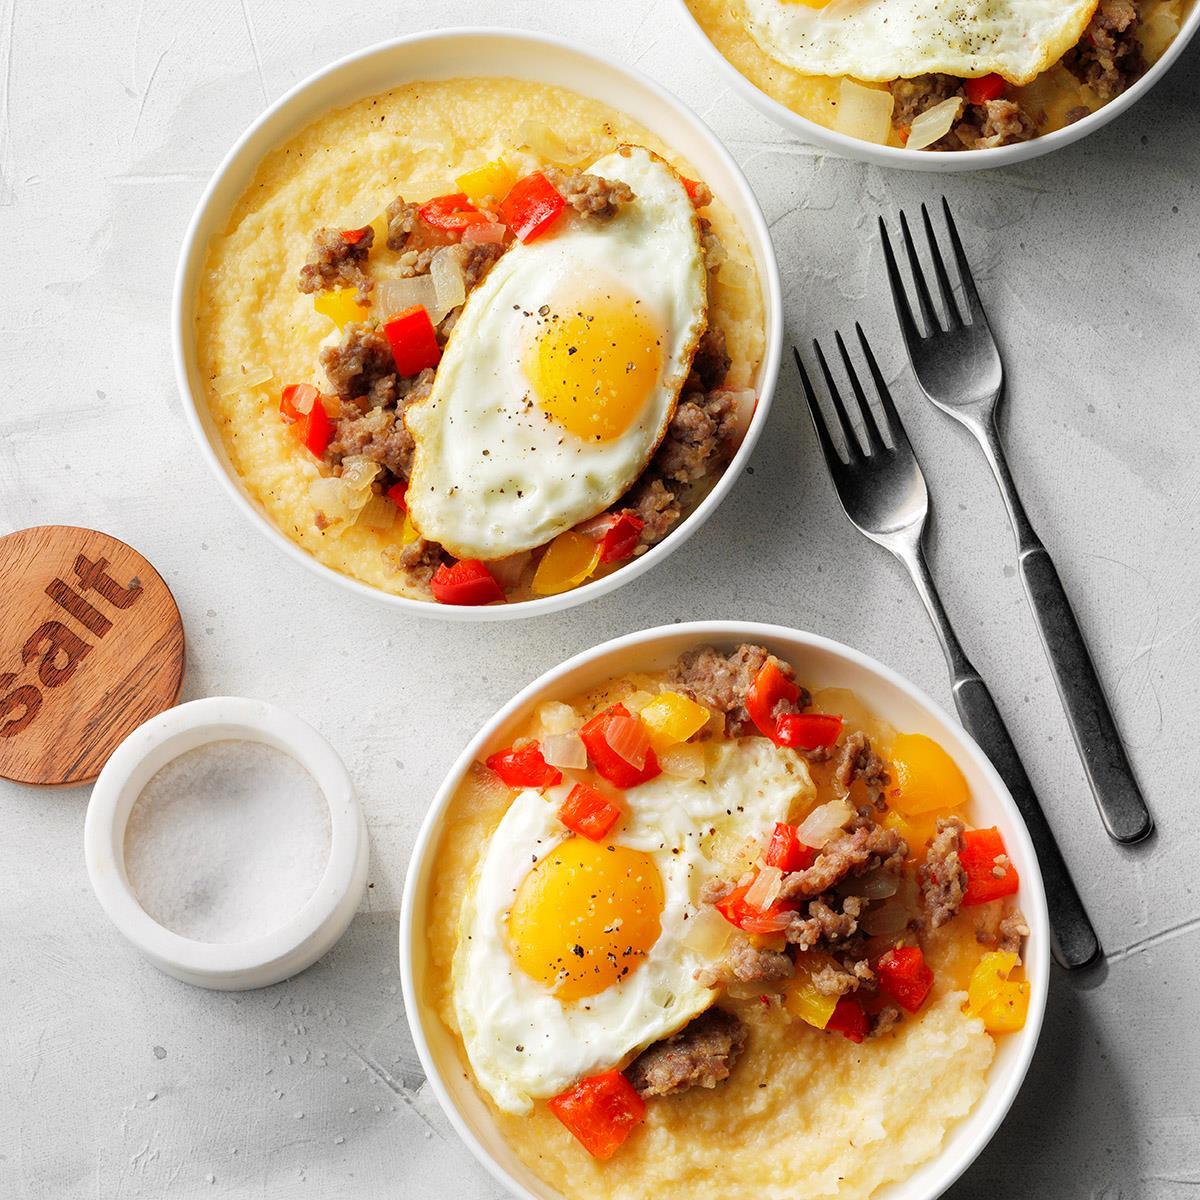 Sausage and Eggs over Cheddar-Parmesan Grits